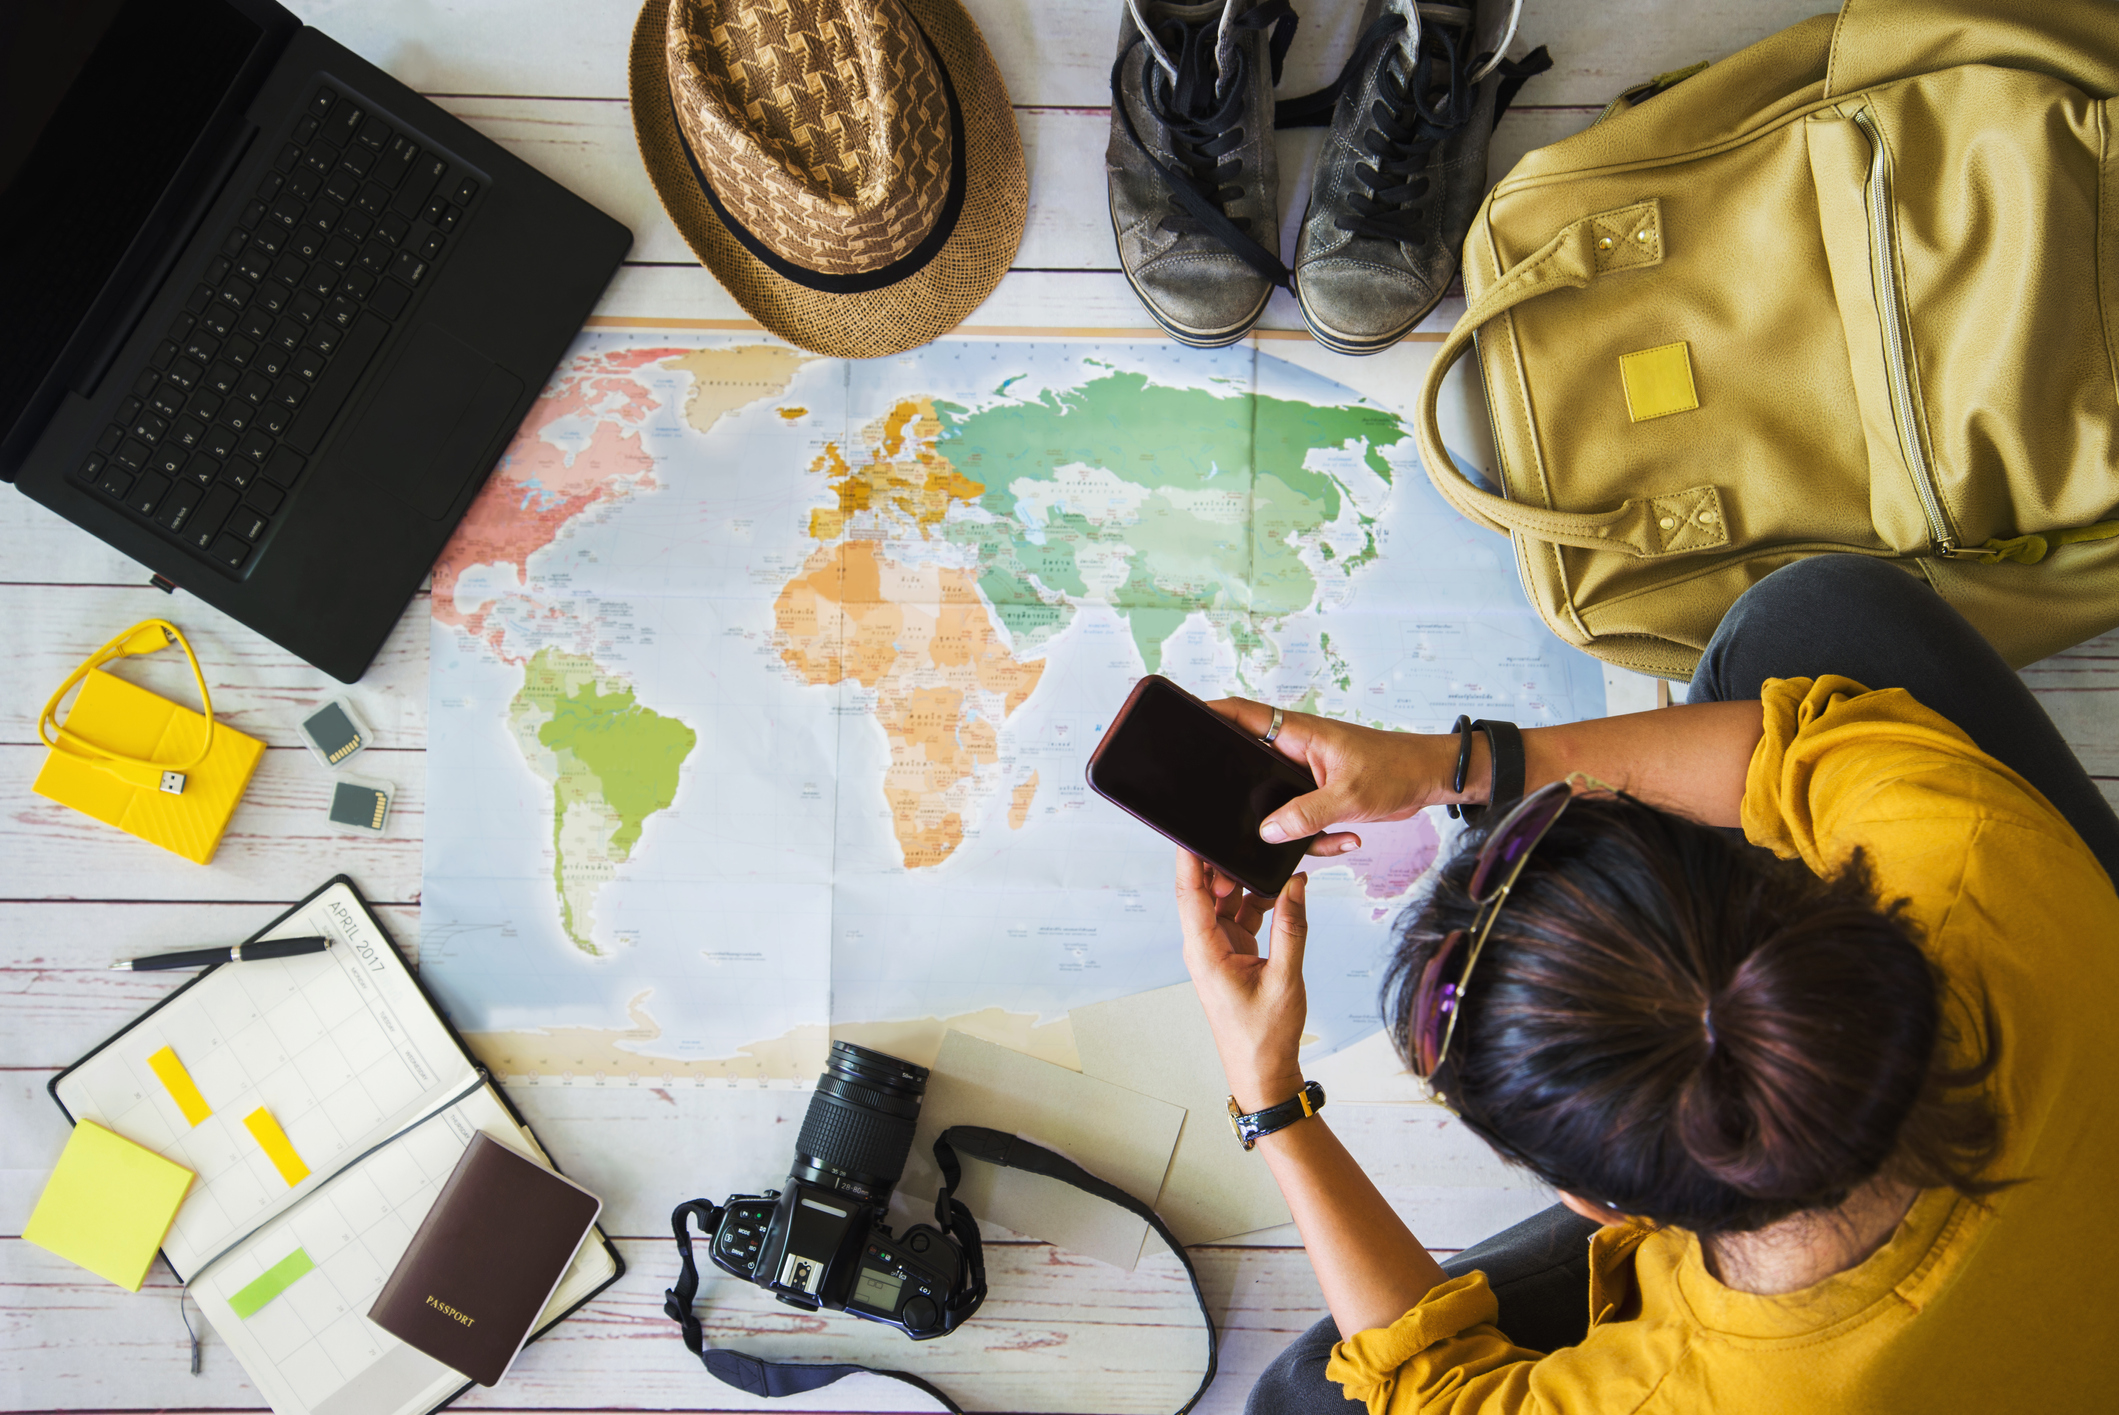 Girl planning her travels with a world map and packing essentials like notebook, camera, walking boots and backpack